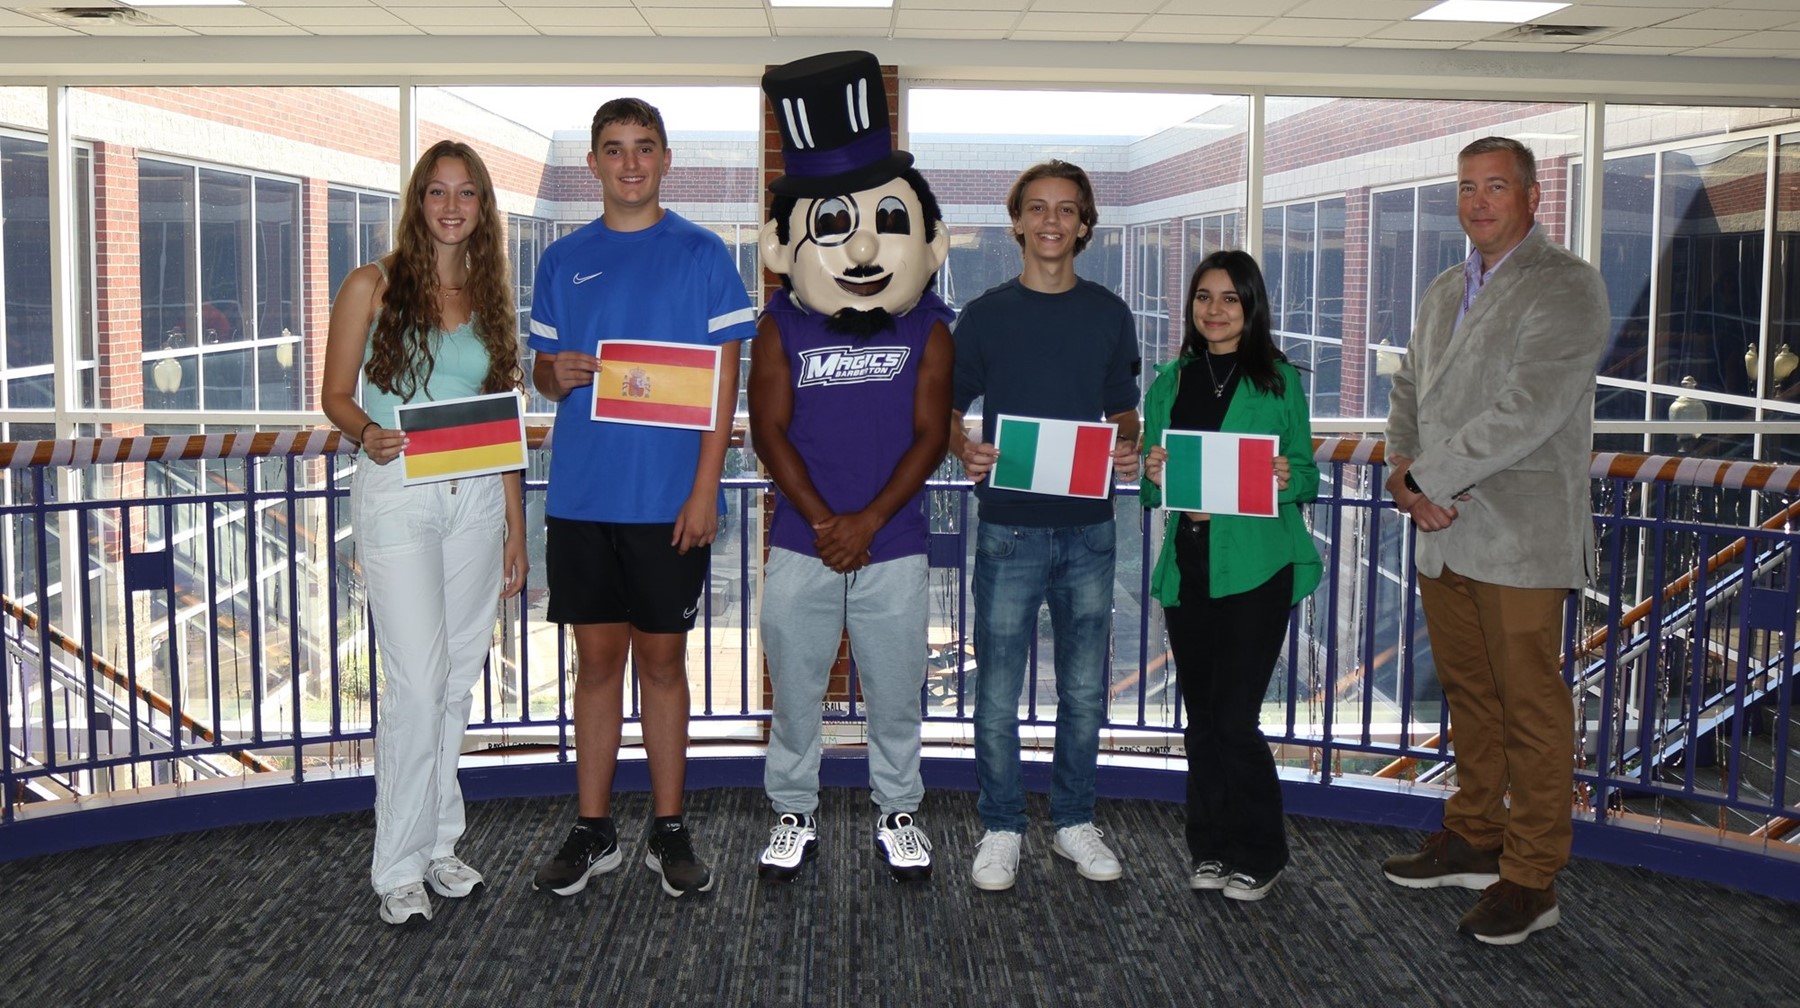 BHS WELCOMES FOUR FROM EUROPE!